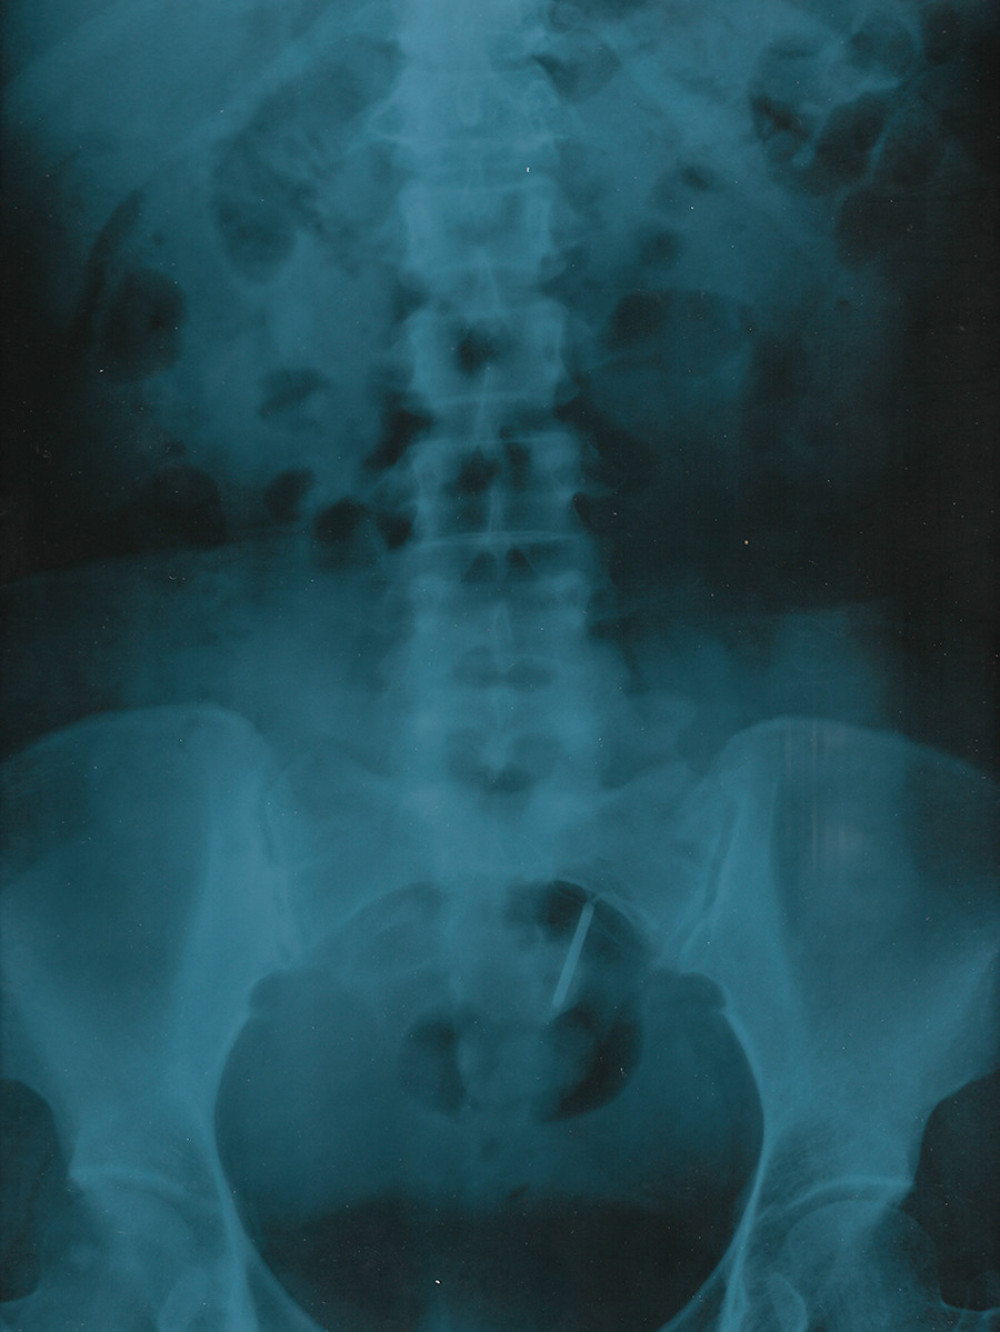 Plain abdominal radiograph showing the intrauterine device, which is to be pulled upward and obliquely because of the anatomical distortion of the uterus due to the adhesion to the abdominal wall.